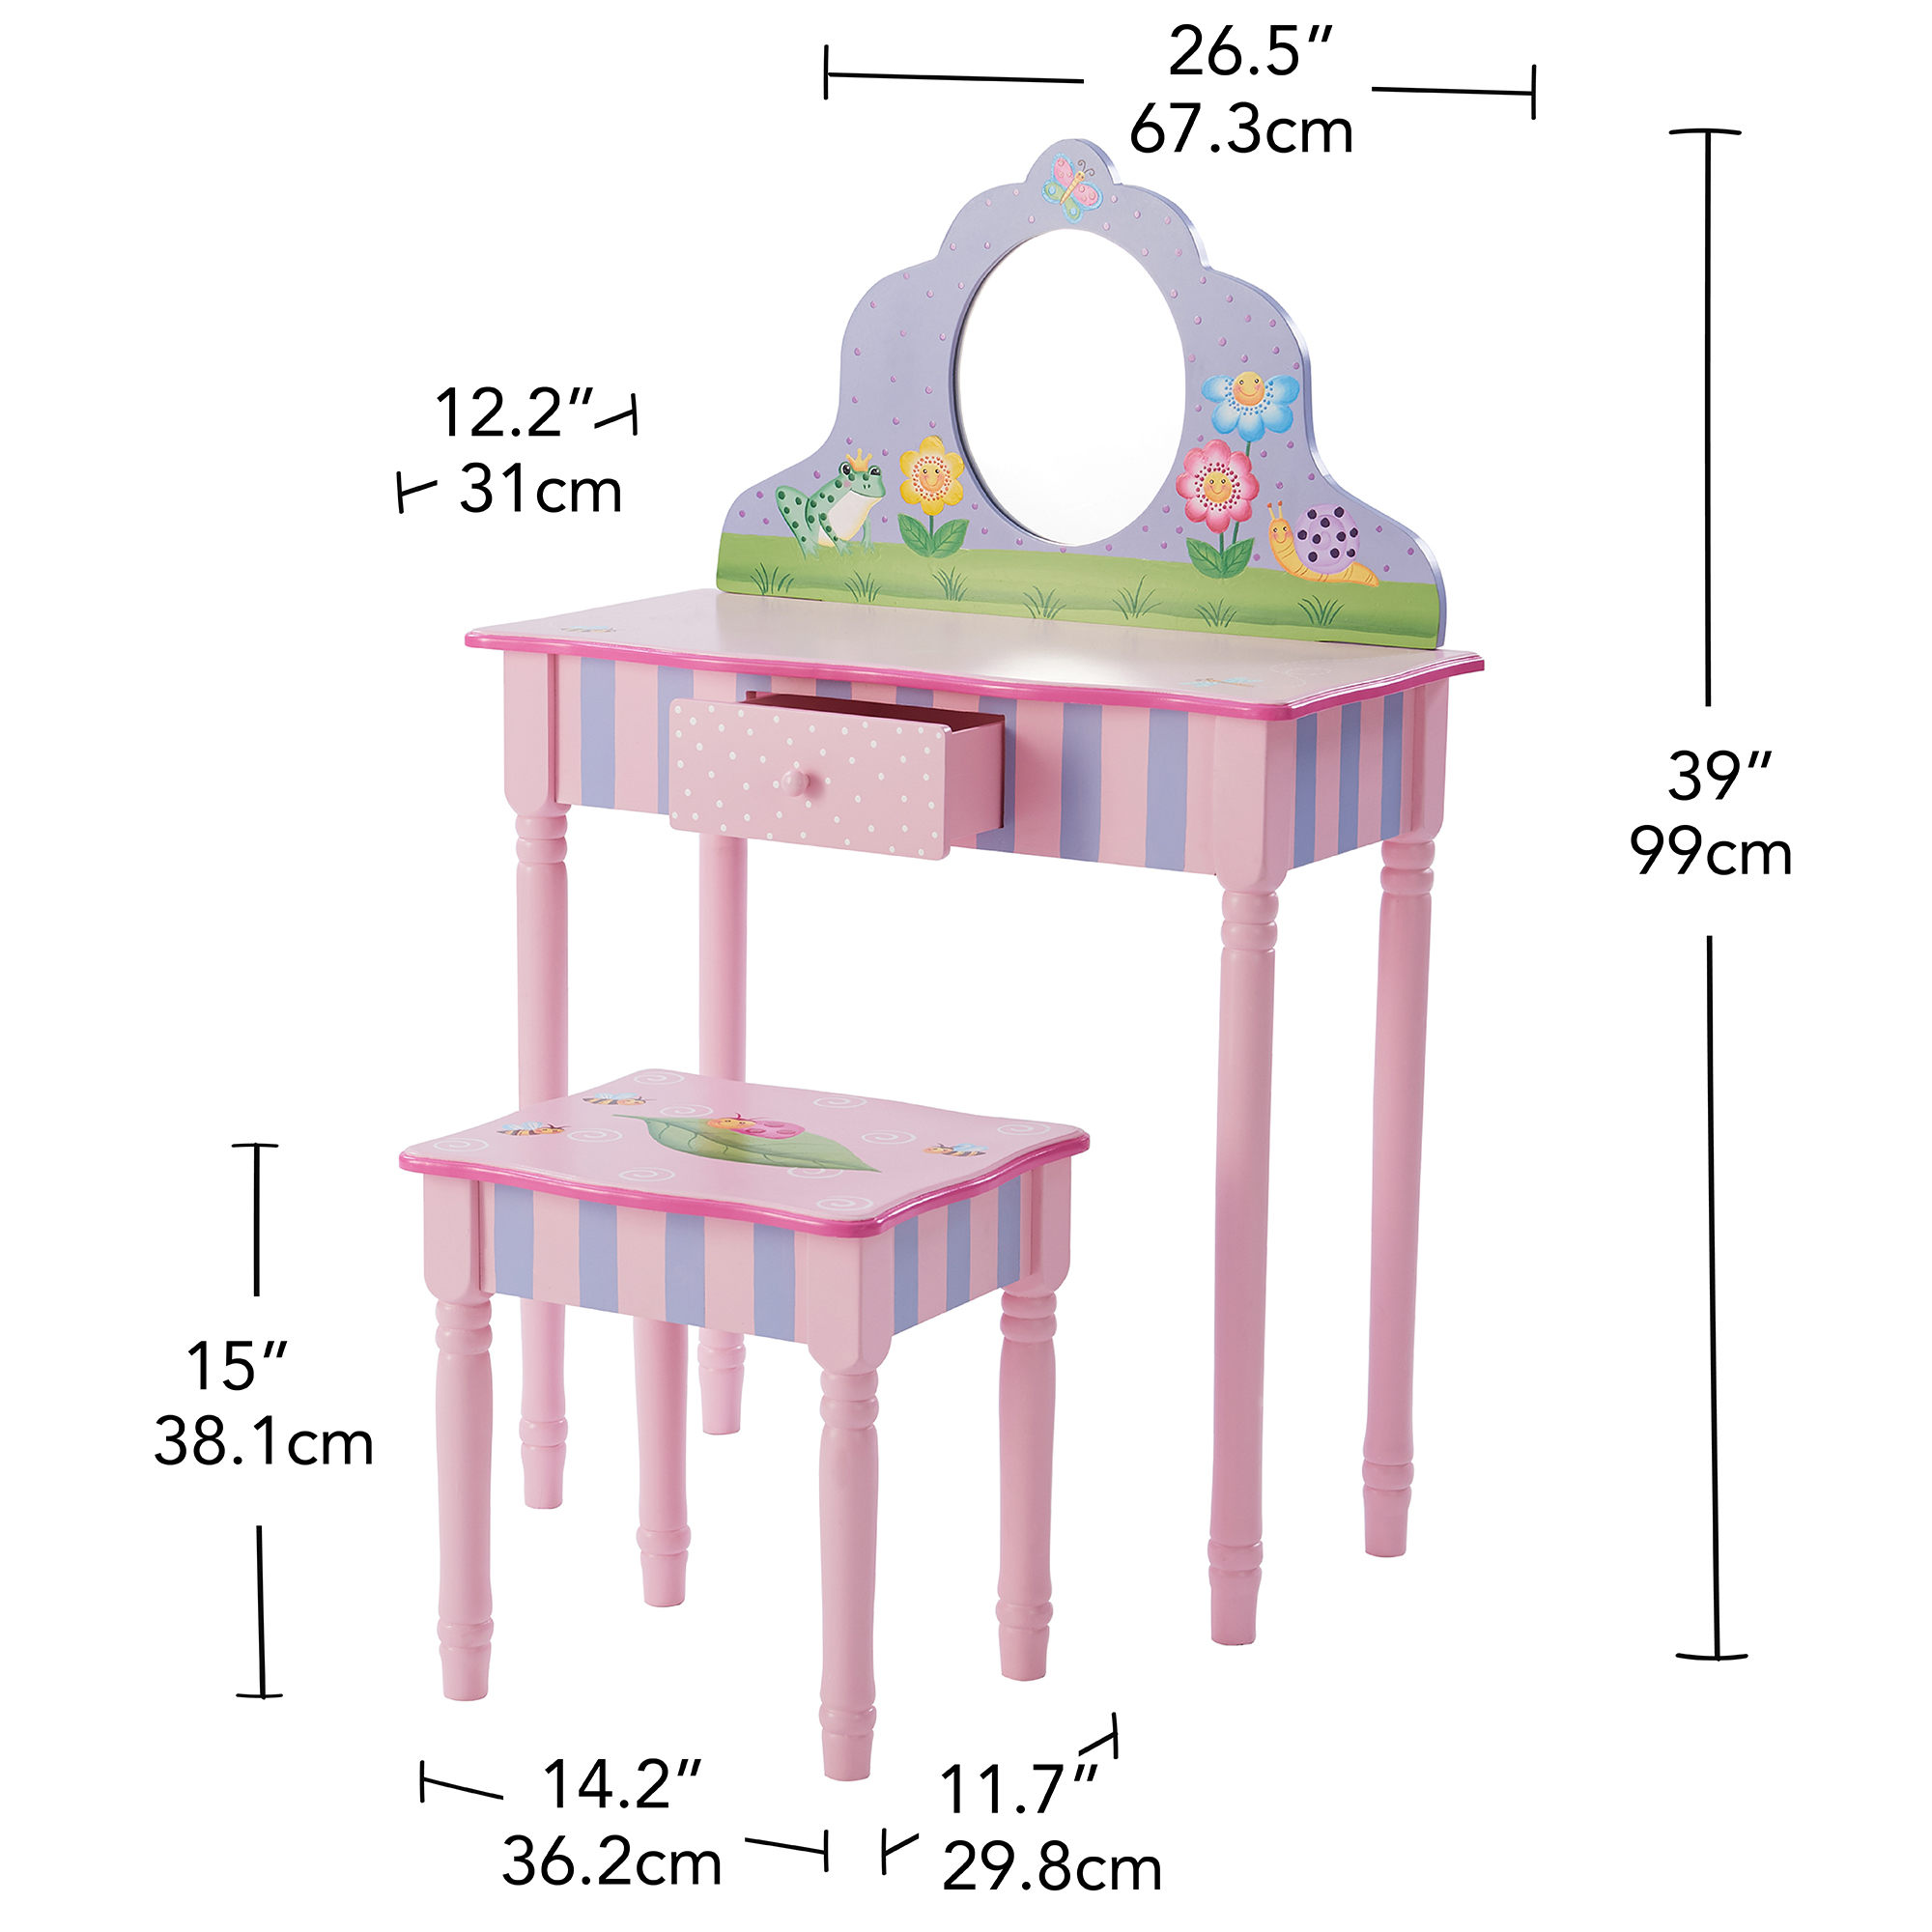 Fantasy Fields by Teamson Kids- Magic Garden Cute Children's Toddler Wooden Vanity Table Set/ Makeup Desk with Stool, Pink/Purple - image 5 of 10